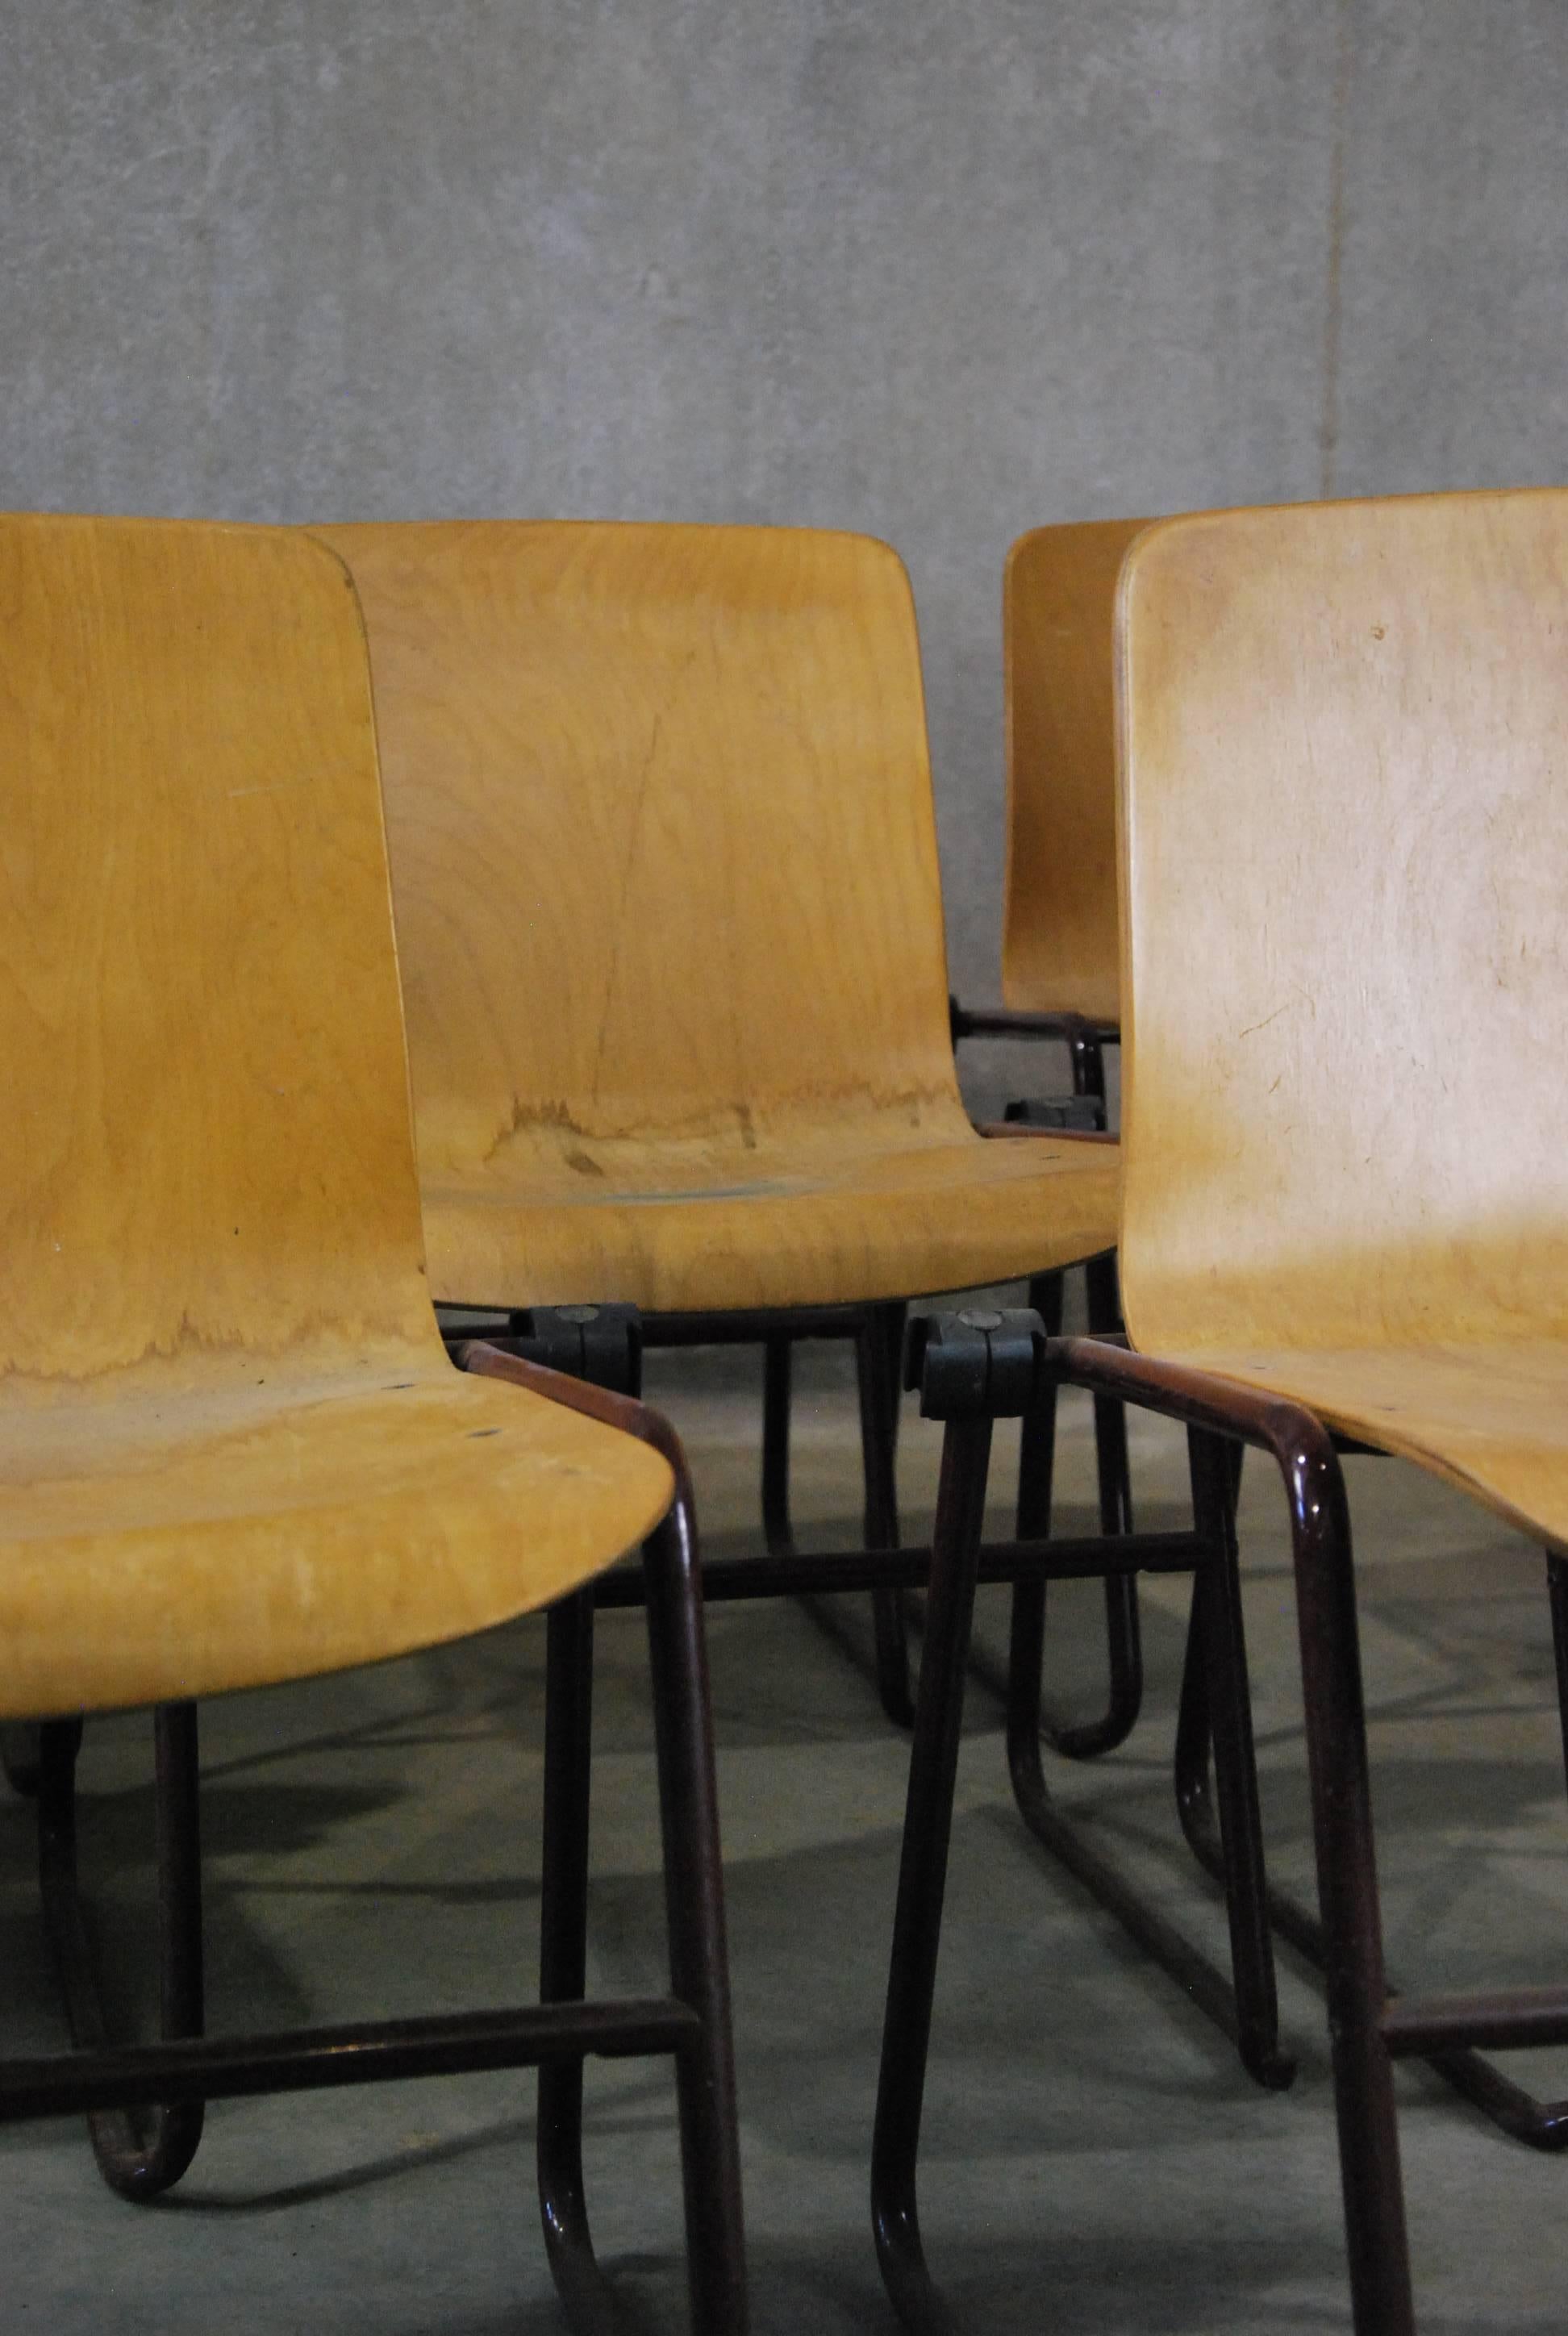 These unusual Kinetics bent plywood chairs were made in the 1980s, although their look is Mid-Century Modern. The iron legs have a locking mechanism that allows you to connect the chairs, if desired. Made in Canada by J. Hayward. Quantity of eight